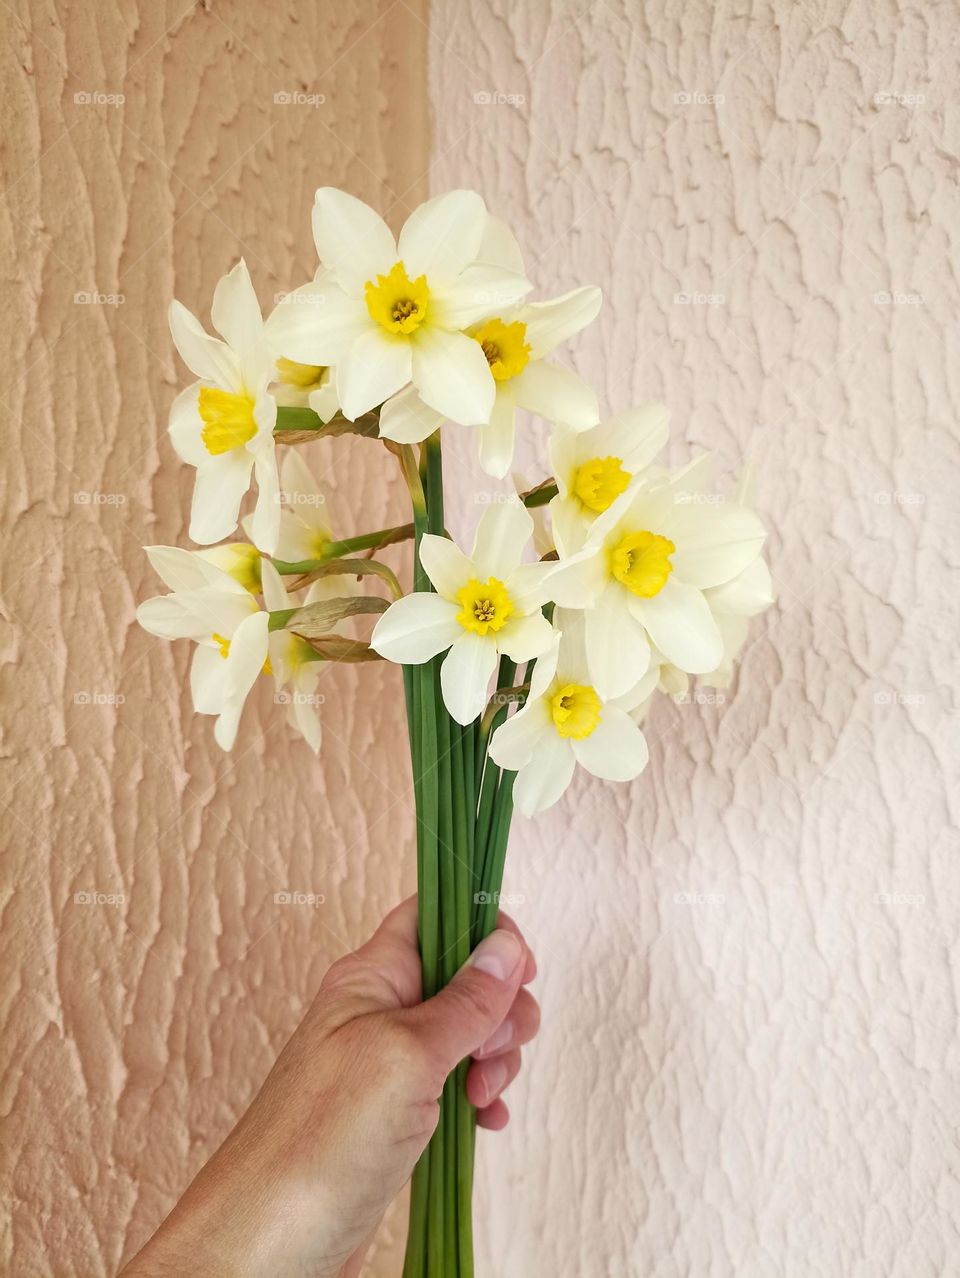 bouquet narcissus flowers in the hand, love spring time